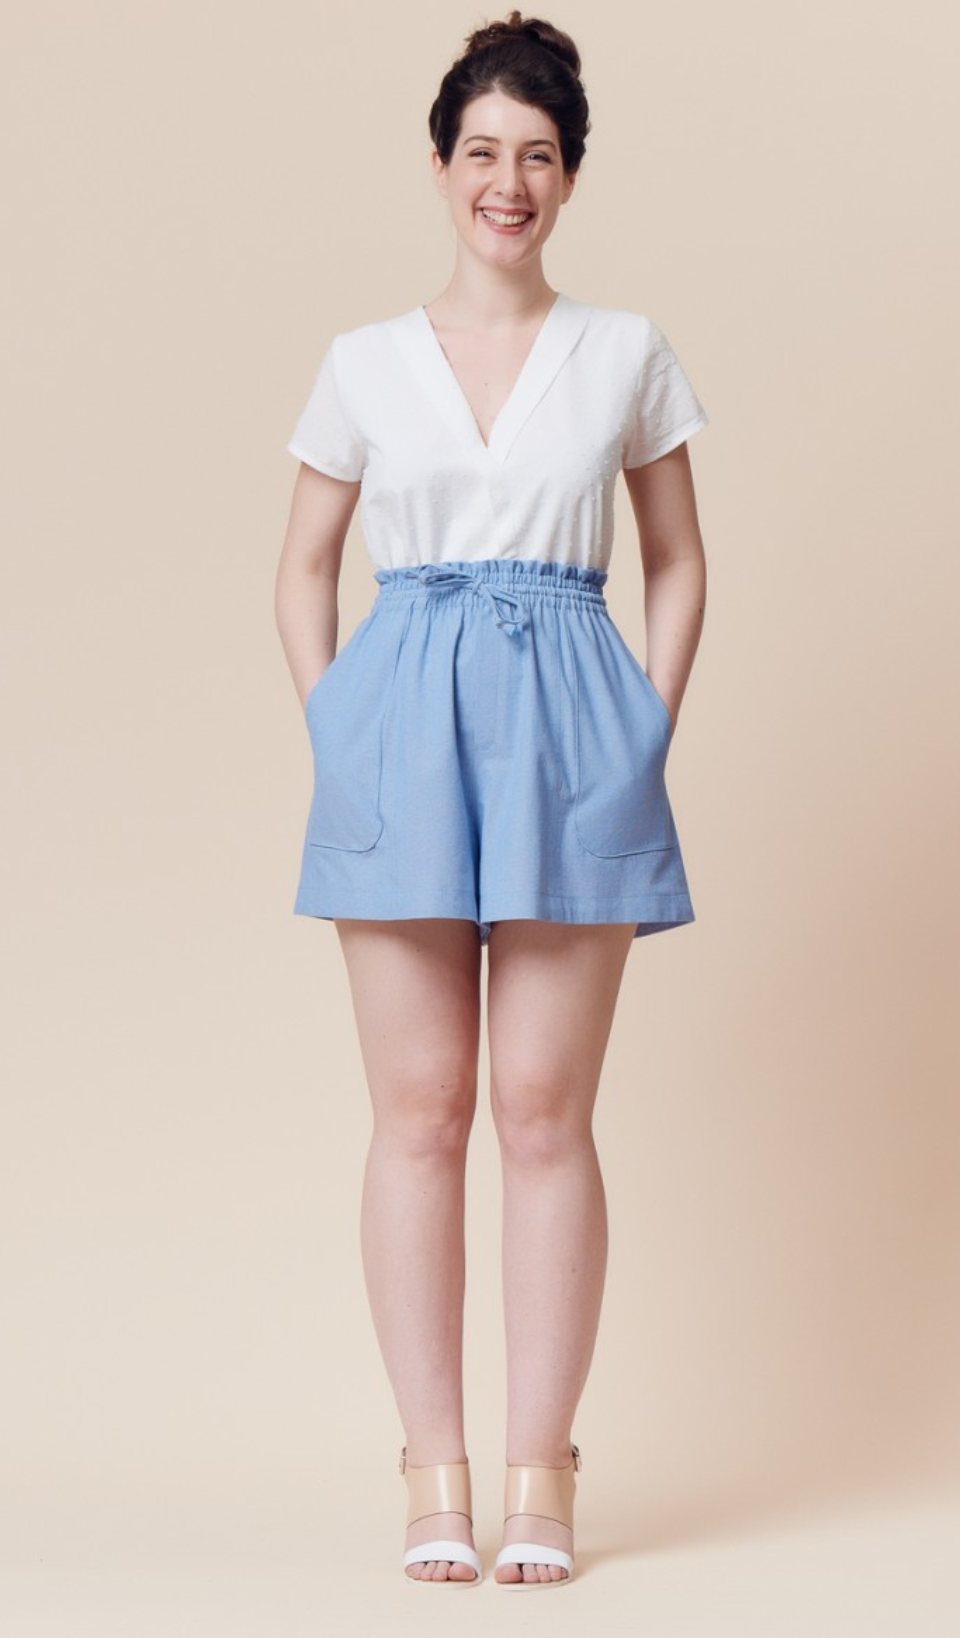 Woman wearing the Goji Shorts sewing pattern by Deer and Doe. A shorts pattern made in chambray, rayon twill, batiste or linen fabric featuring a high, elasticated paper bag waist, drawstring and patch pockets.